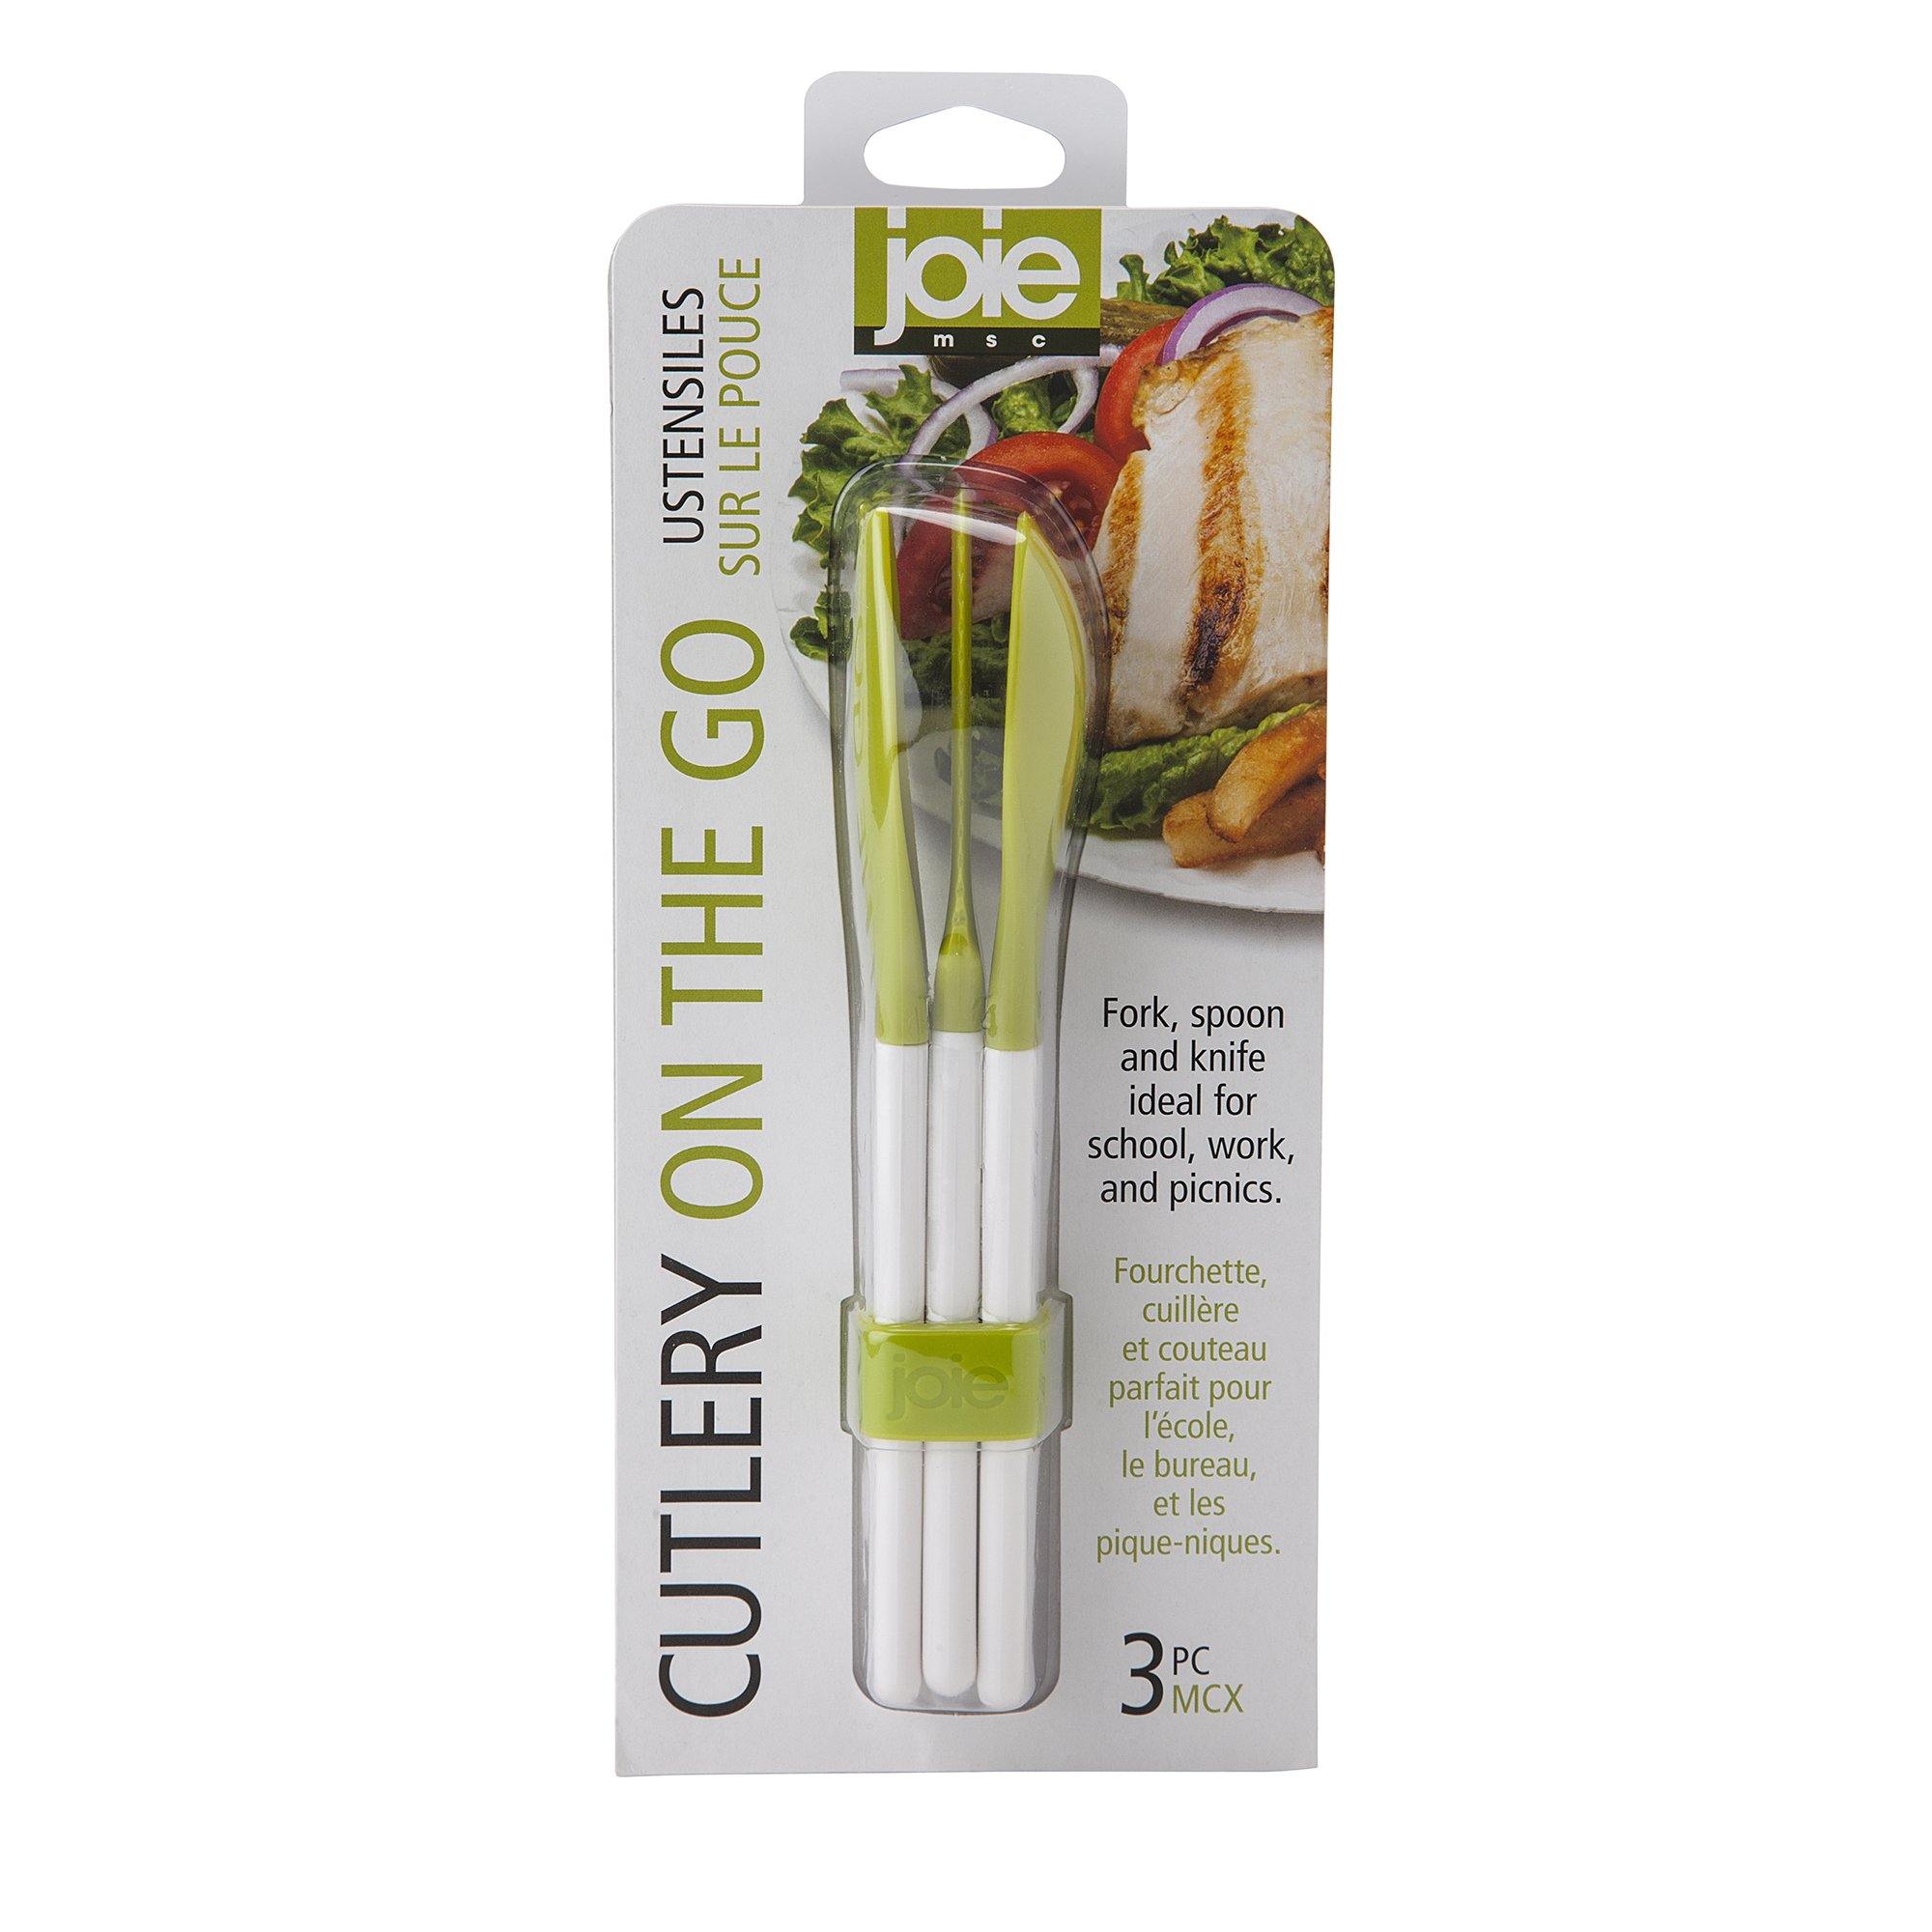 Joie MSC Cutlery On The Go 3Pc - Dollar Max Depot